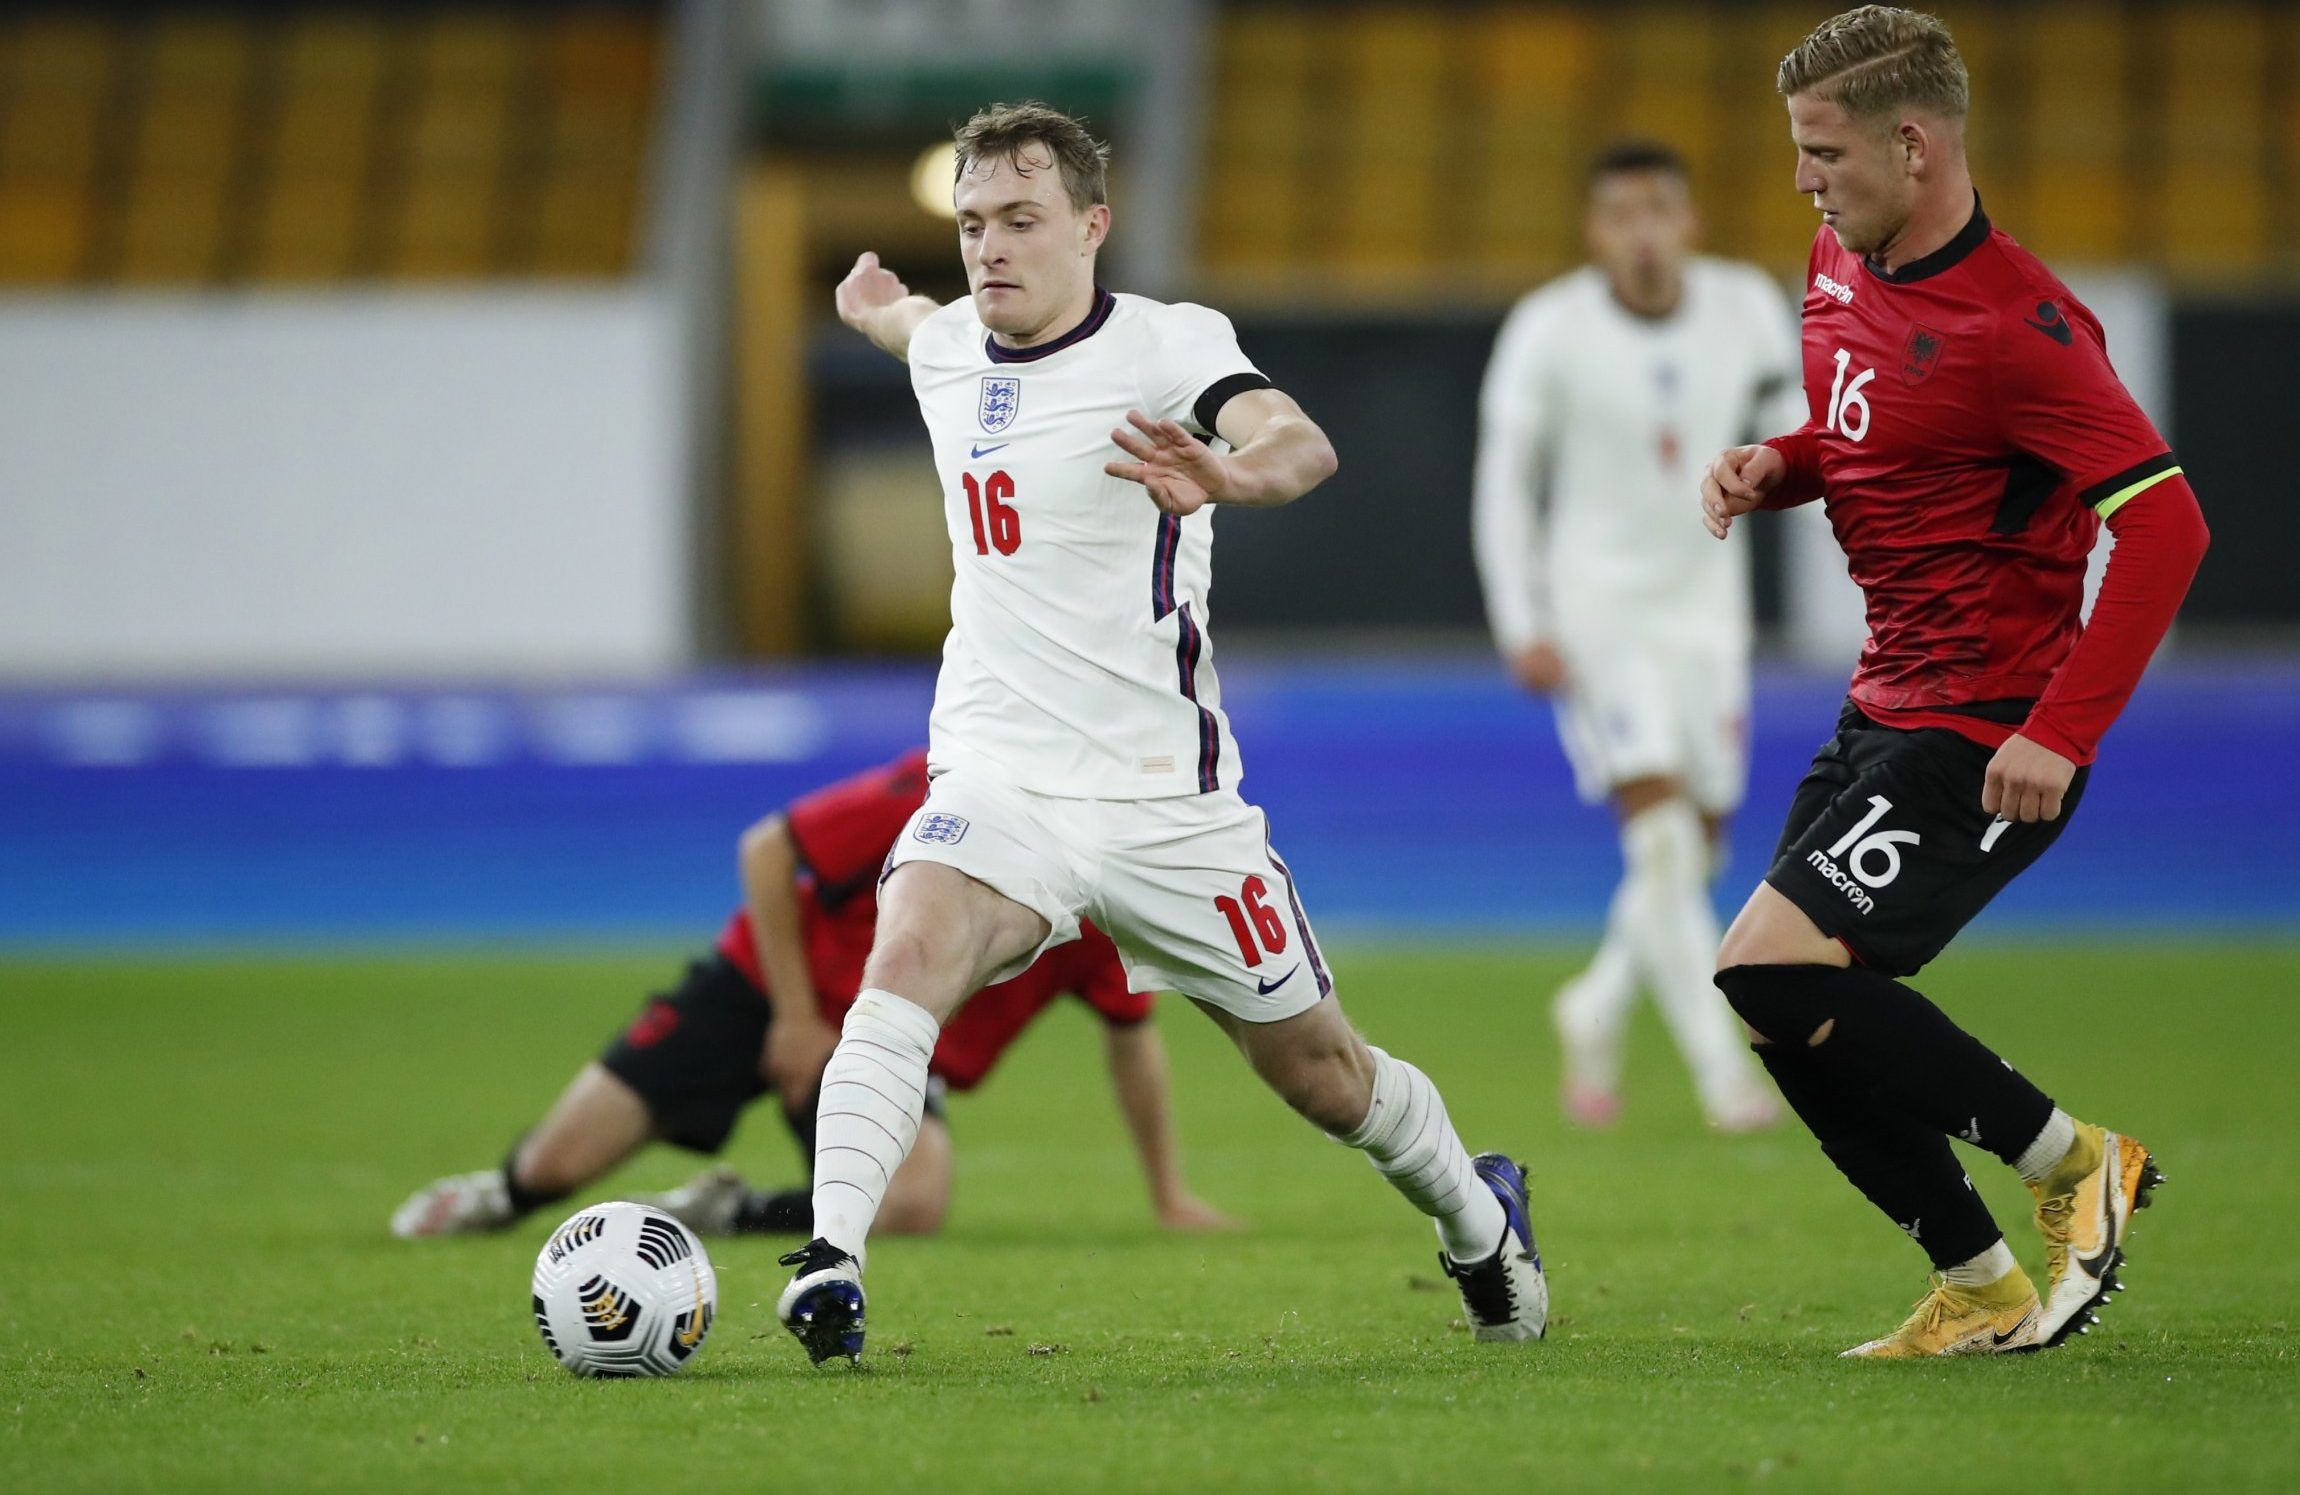 spurs and norwich loanee oliver skipp in action for england u21 vs albania qualifiers